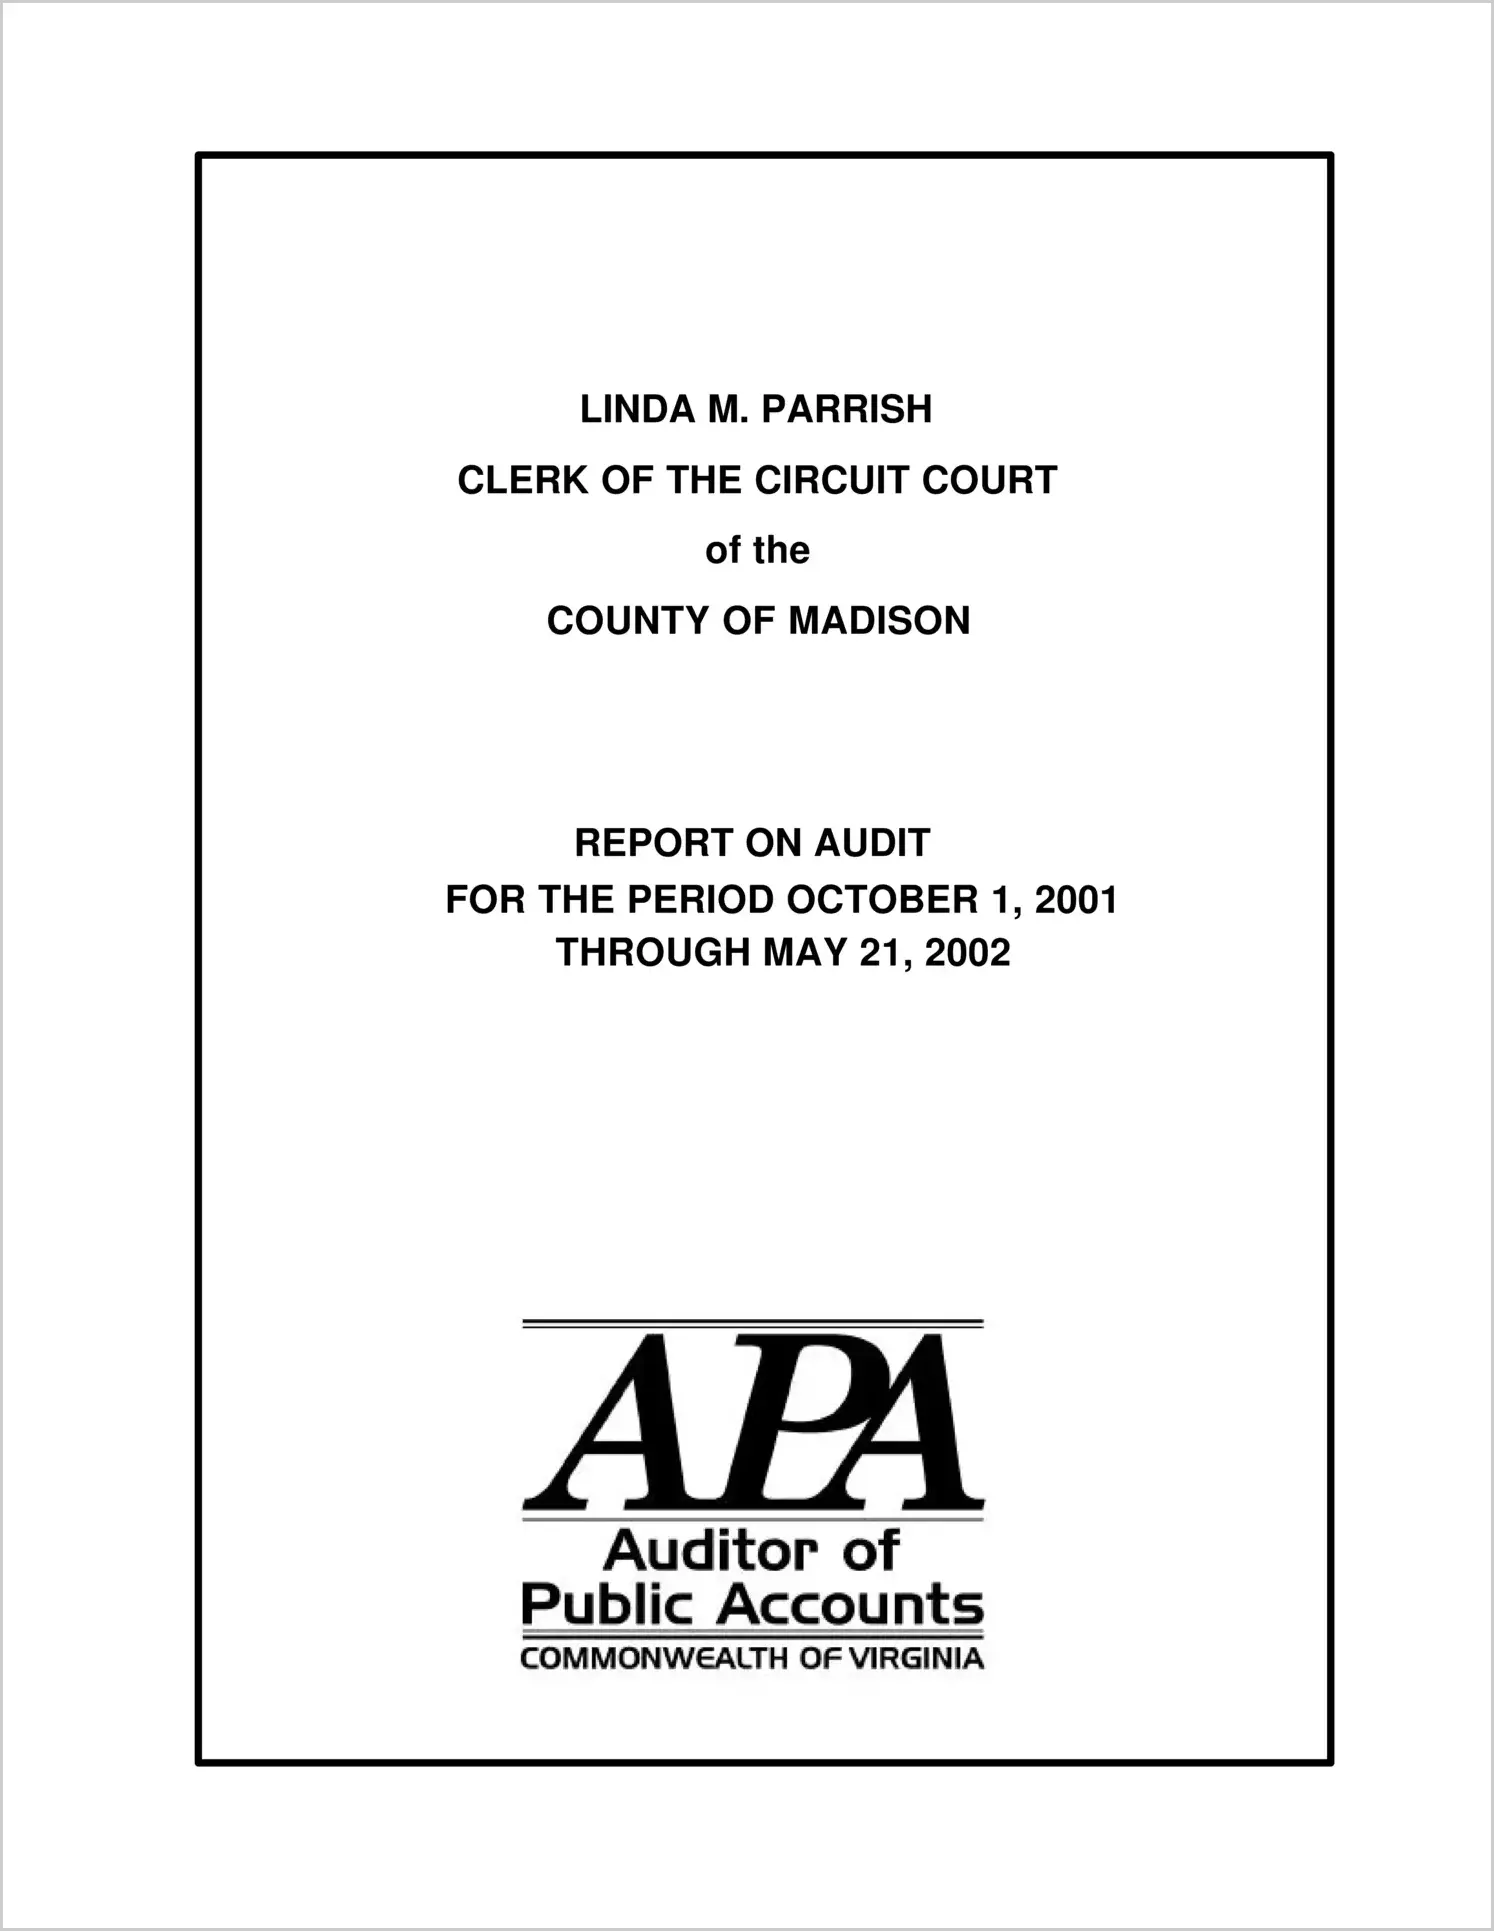 Clerk of the Circuit Court (Turnover) for the County of Madison for the period October 1, 2001 through May 21, 2002